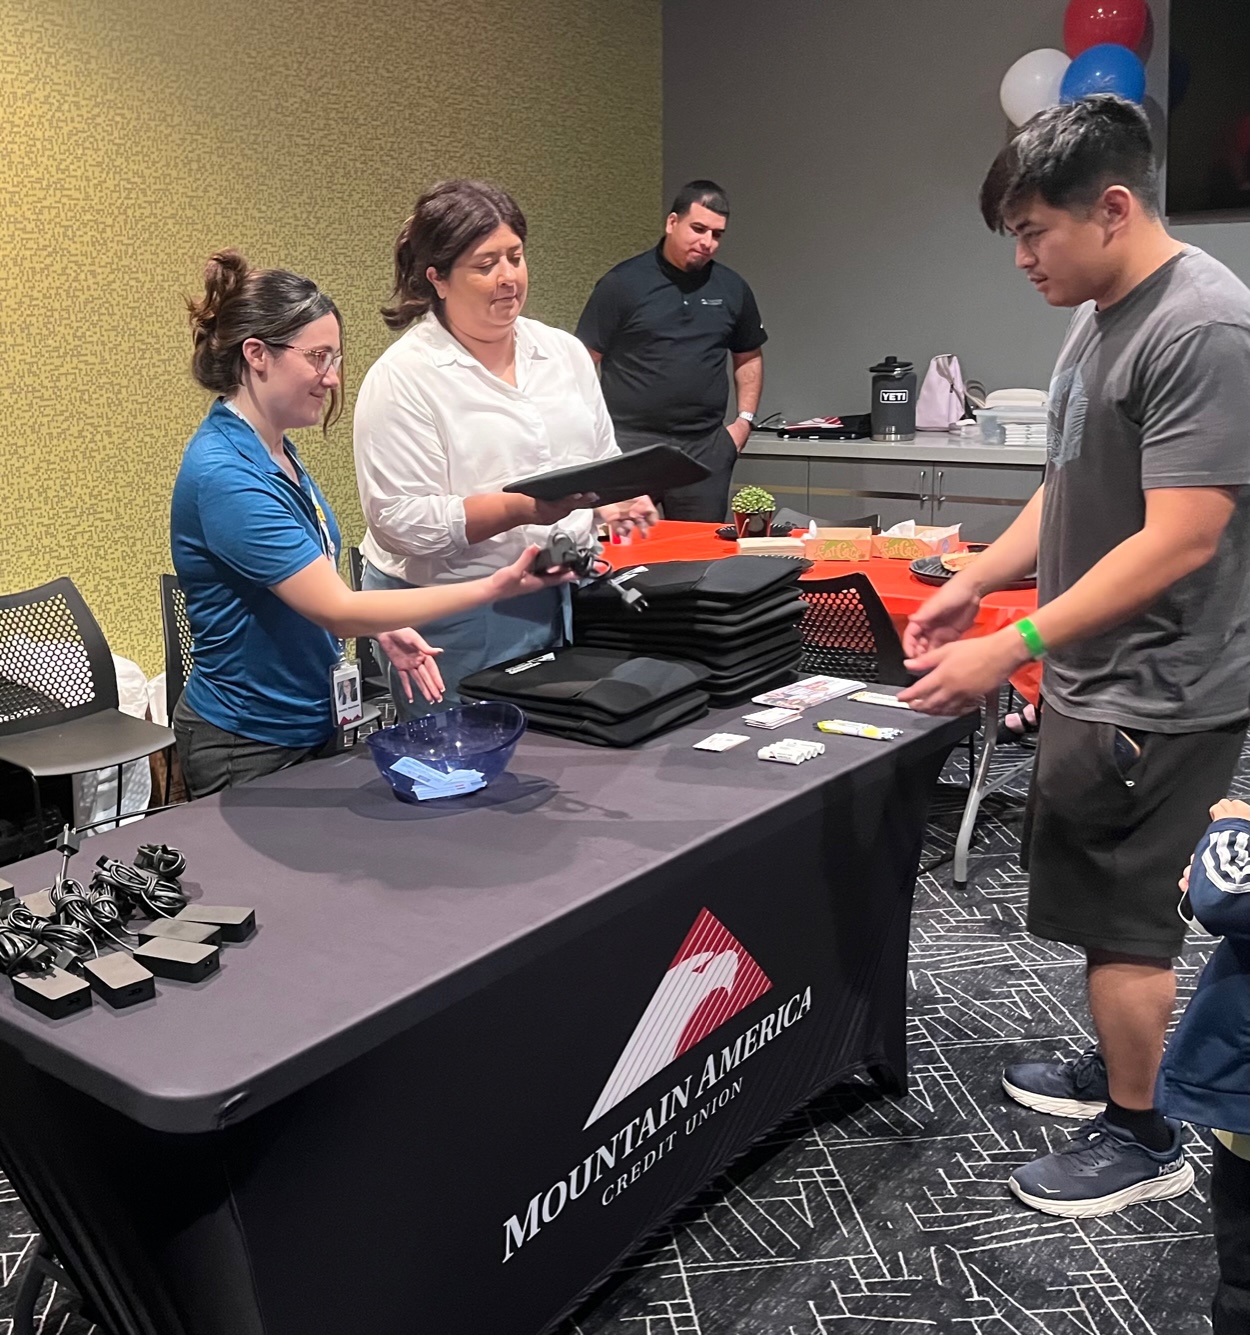 Mountain America Credit Union Partners with USO to Provide Laptops to Military Families: Mountain America Credit Union team members donating laptops to military families